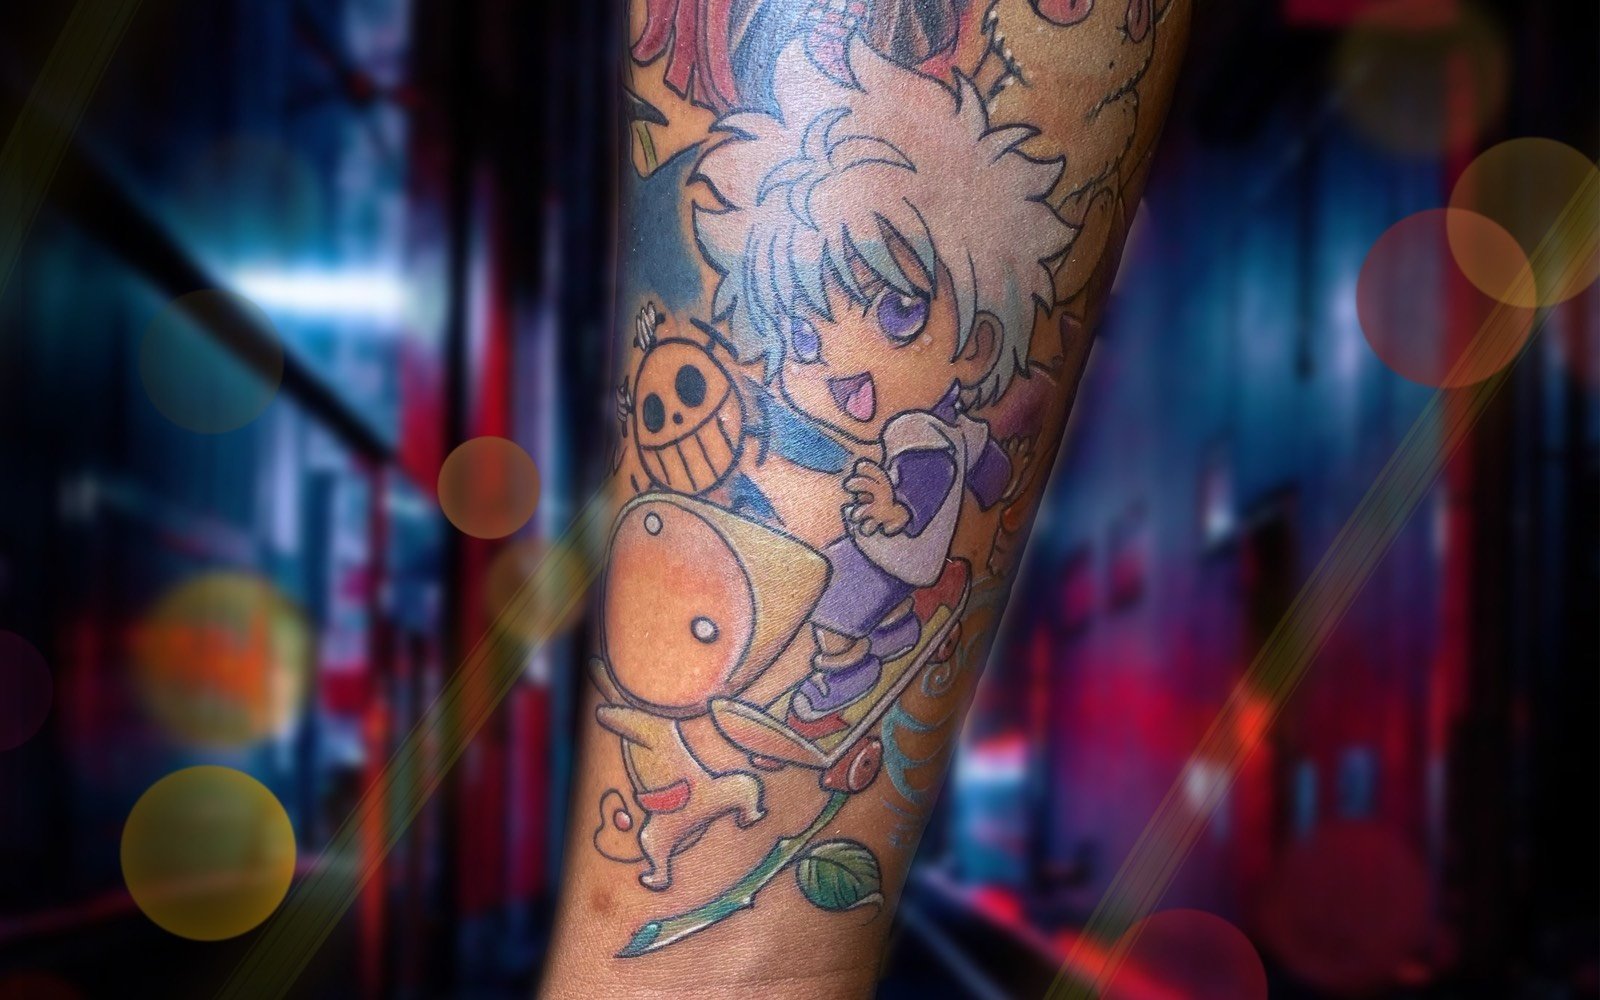 Anime tattoo artist and owner of XSADFAMX Mike Randazzo is building a  community of positivity within the tattoo industry  Digital Journal